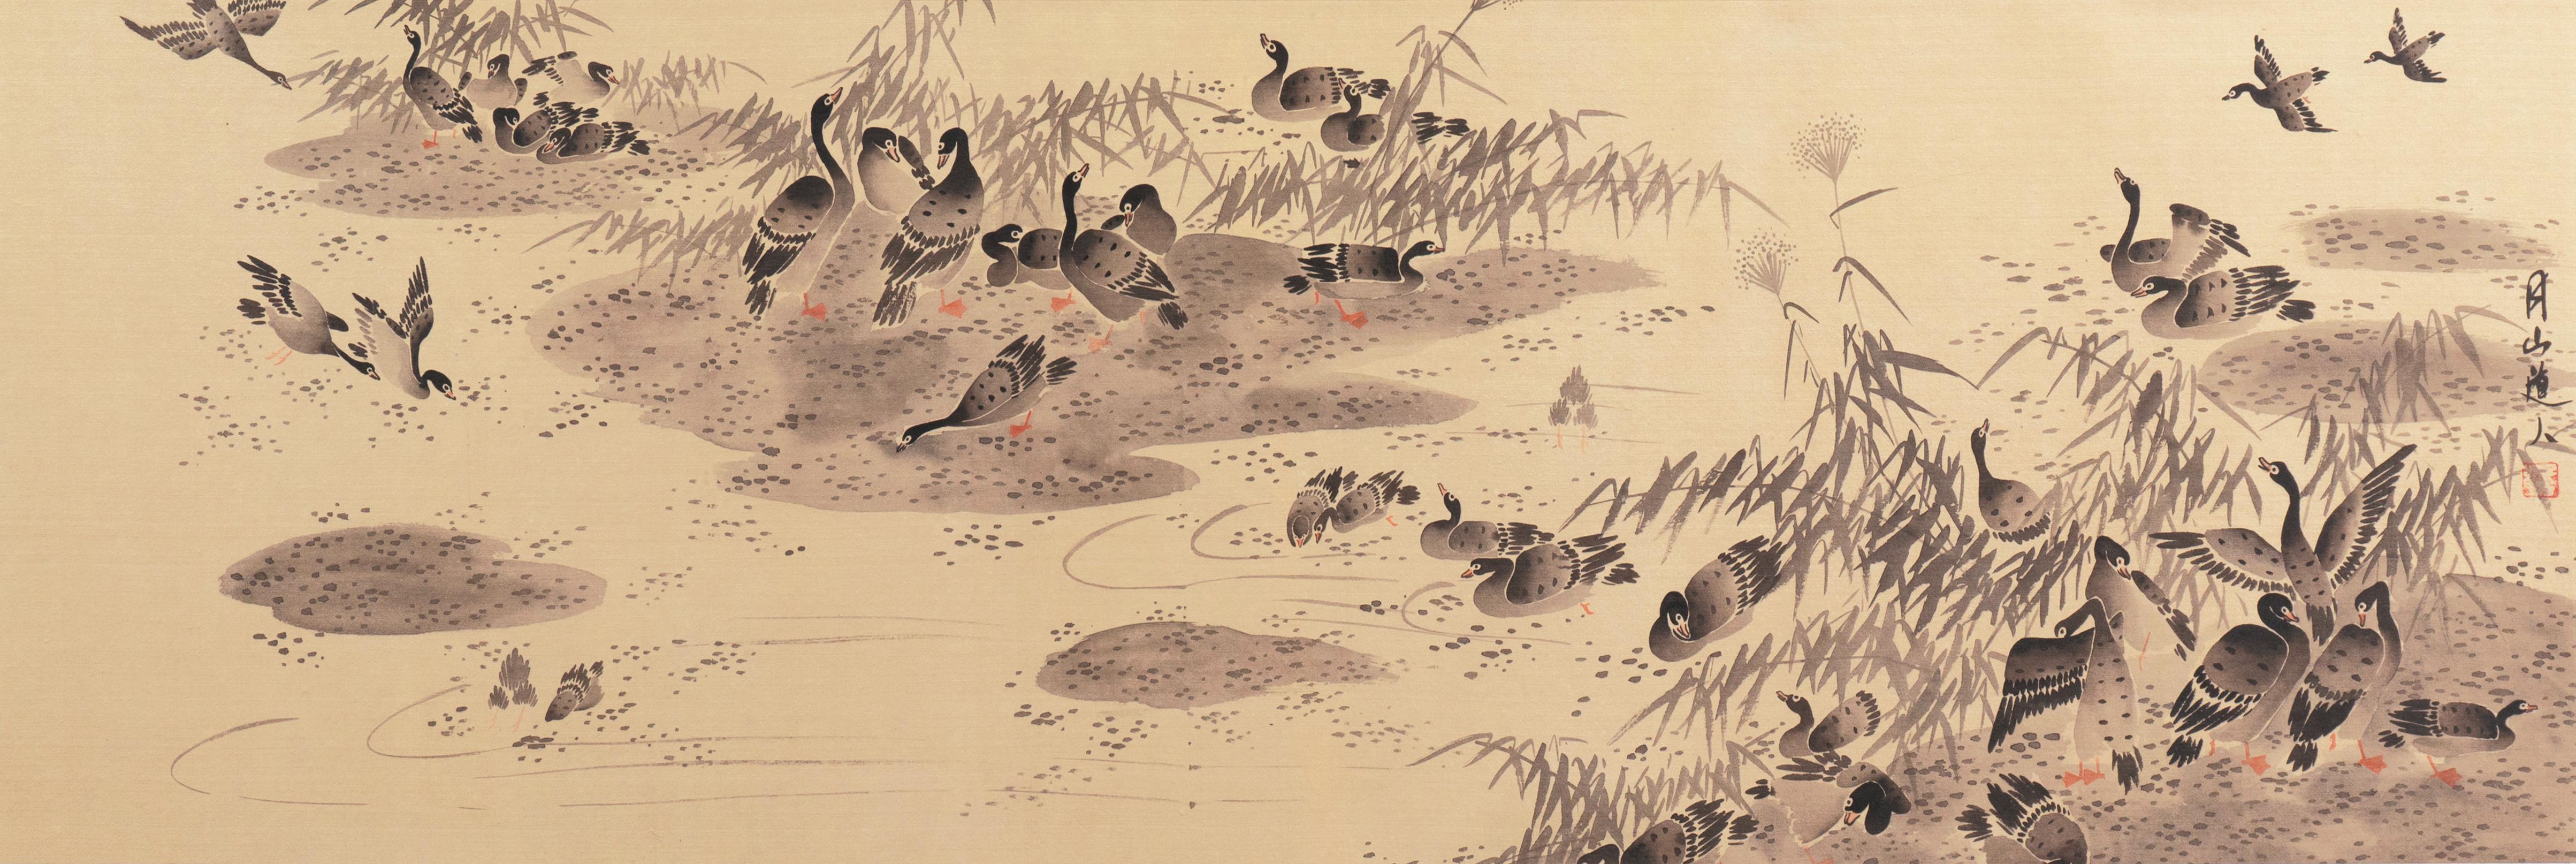  'Geese on a Lake', Chinese scroll, calligraphy, Sumi-e, Song, Yuan Dynasty